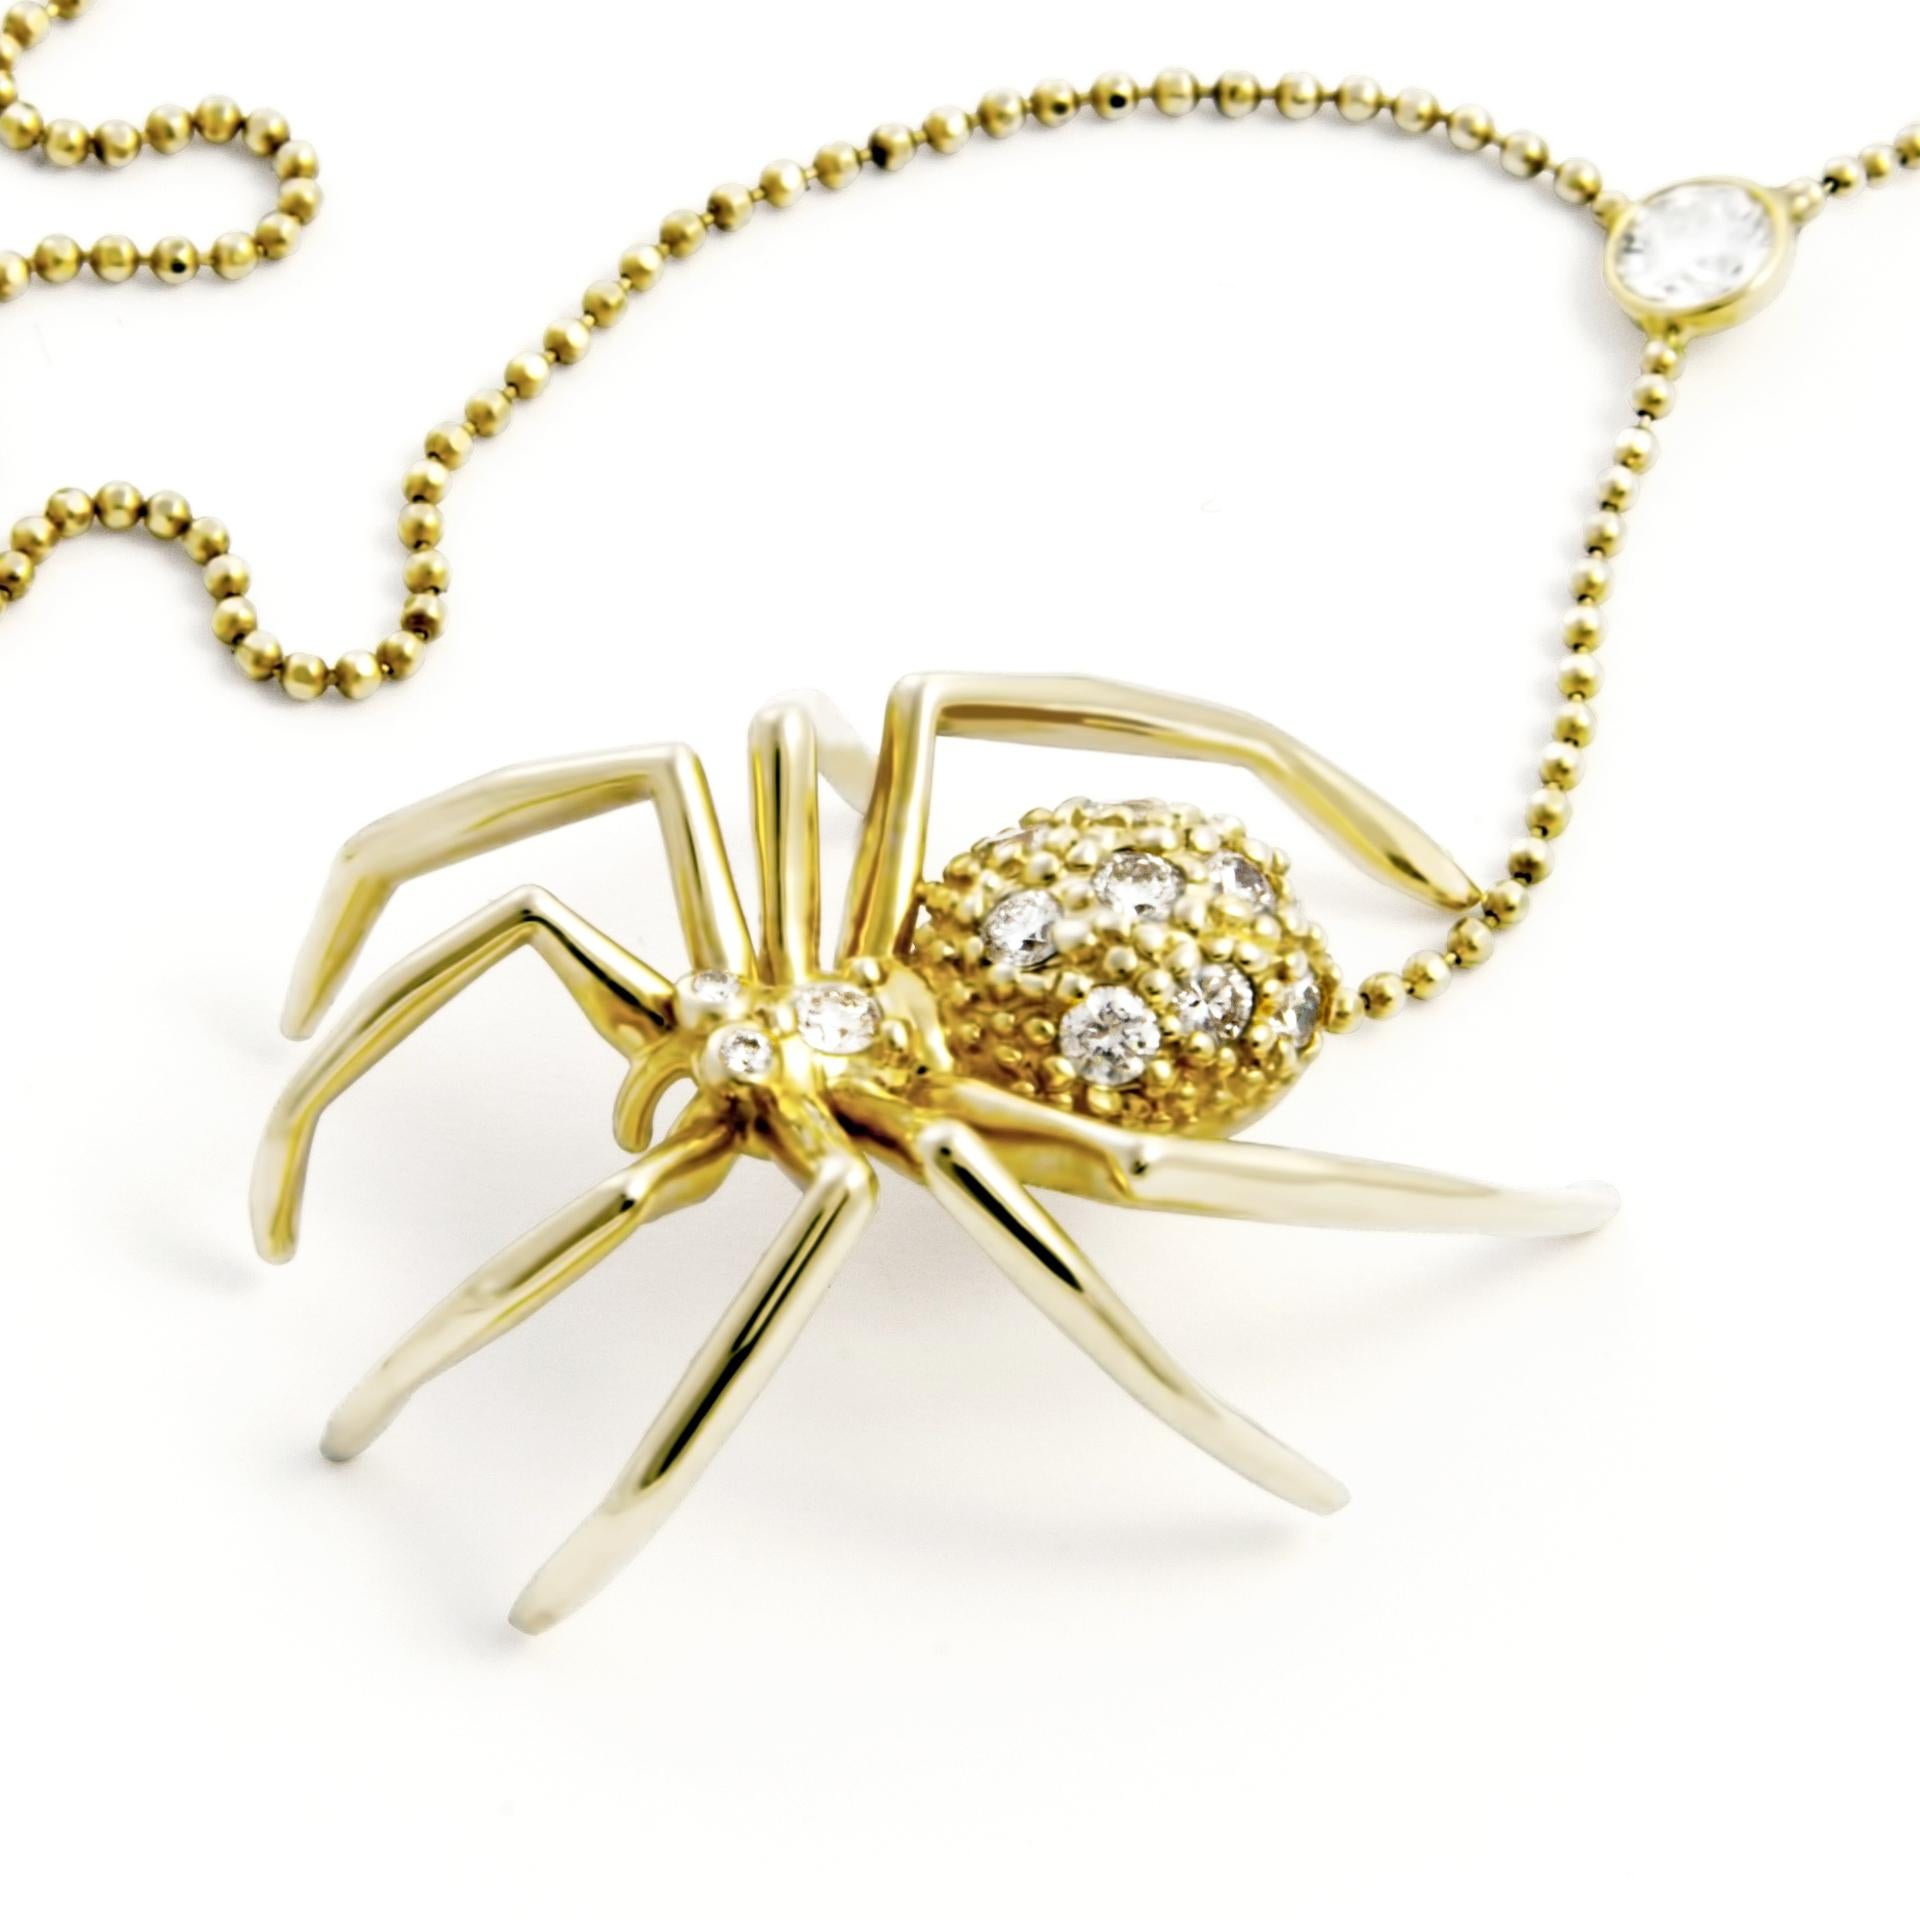 Prepare to embark on a daring journey of style and intrigue with the breathtaking Large Spider Lariat Necklace in Yellow Gold and Diamonds. This magnificent jewel, reminiscent of the spider's mystique, beckons only the boldest souls to adorn